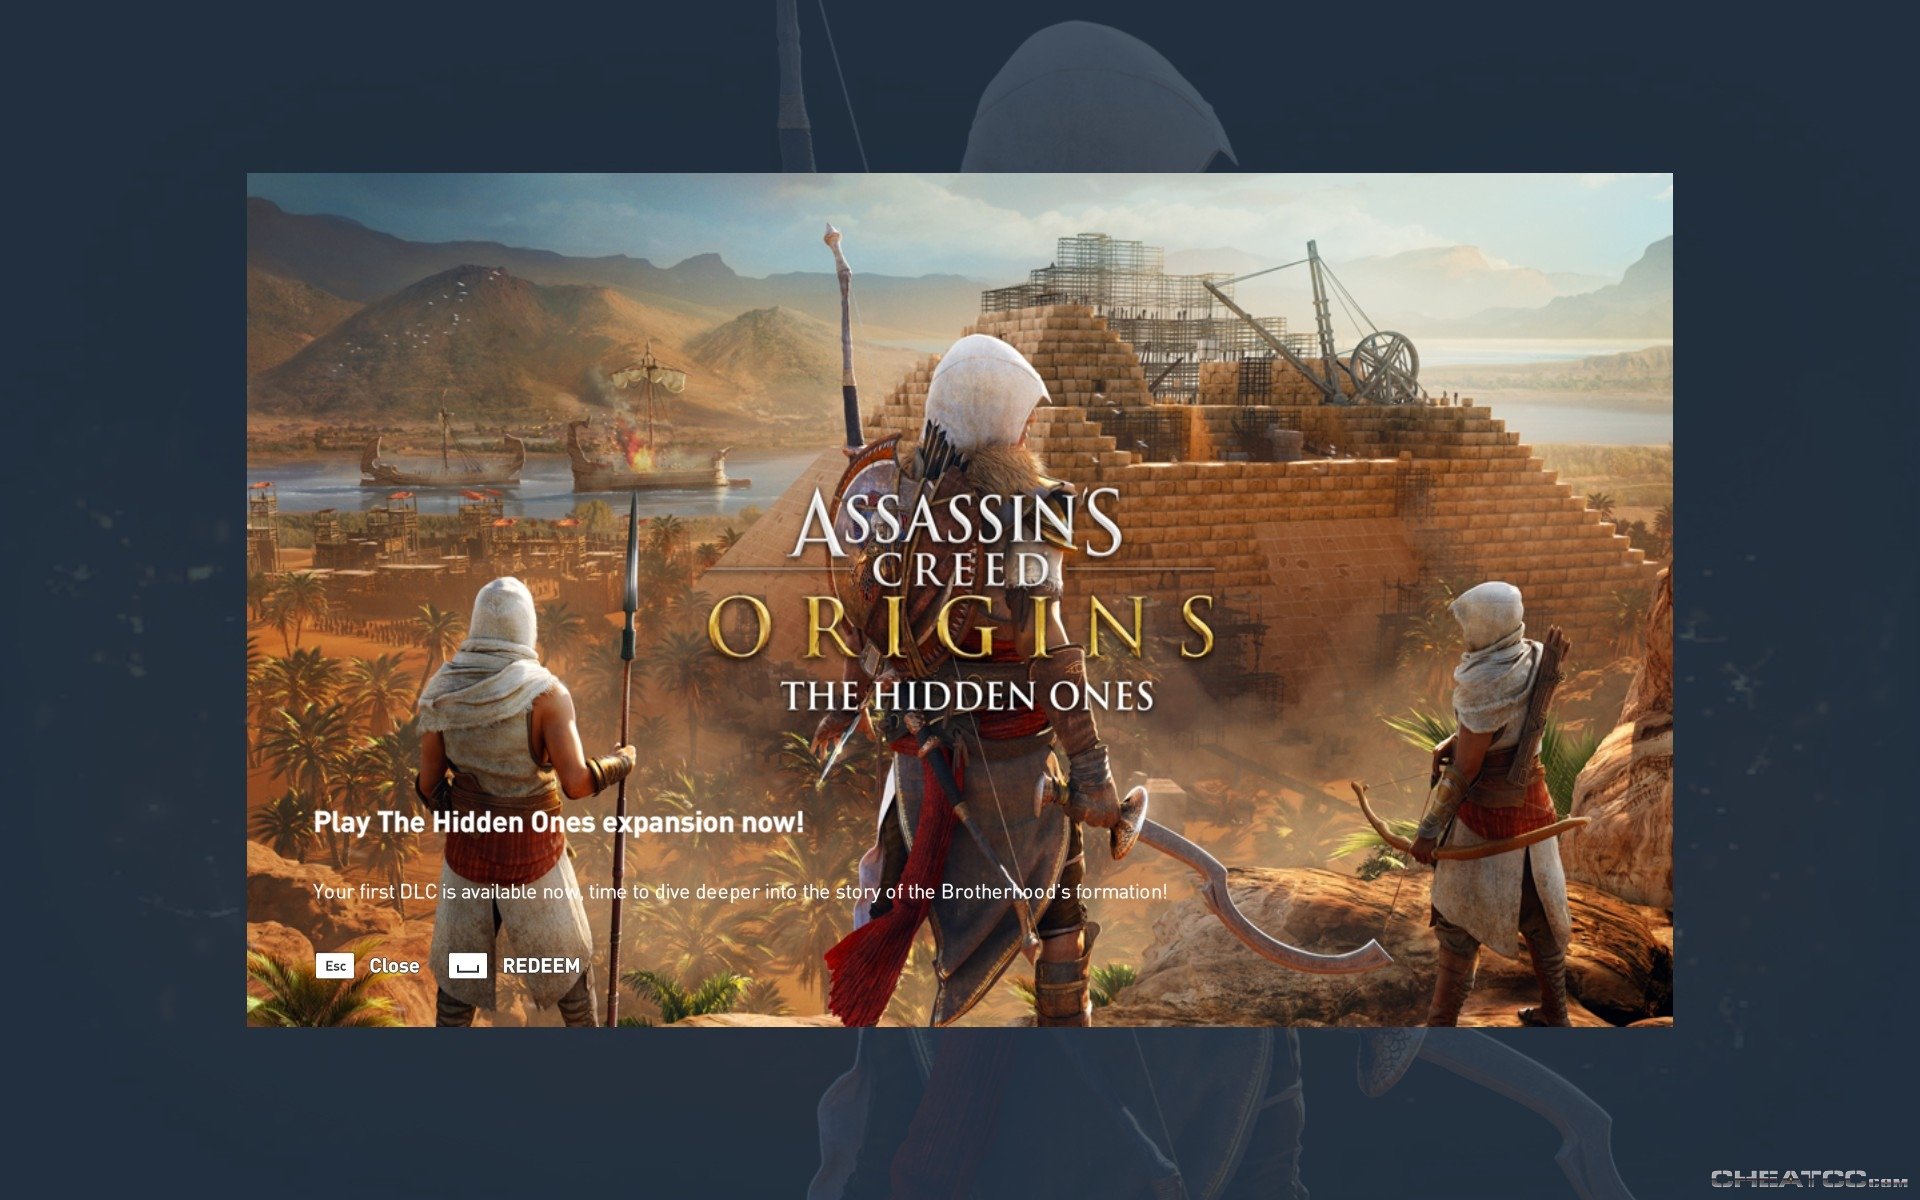 Thoughts on the Assassin's Creed: Origins DLC